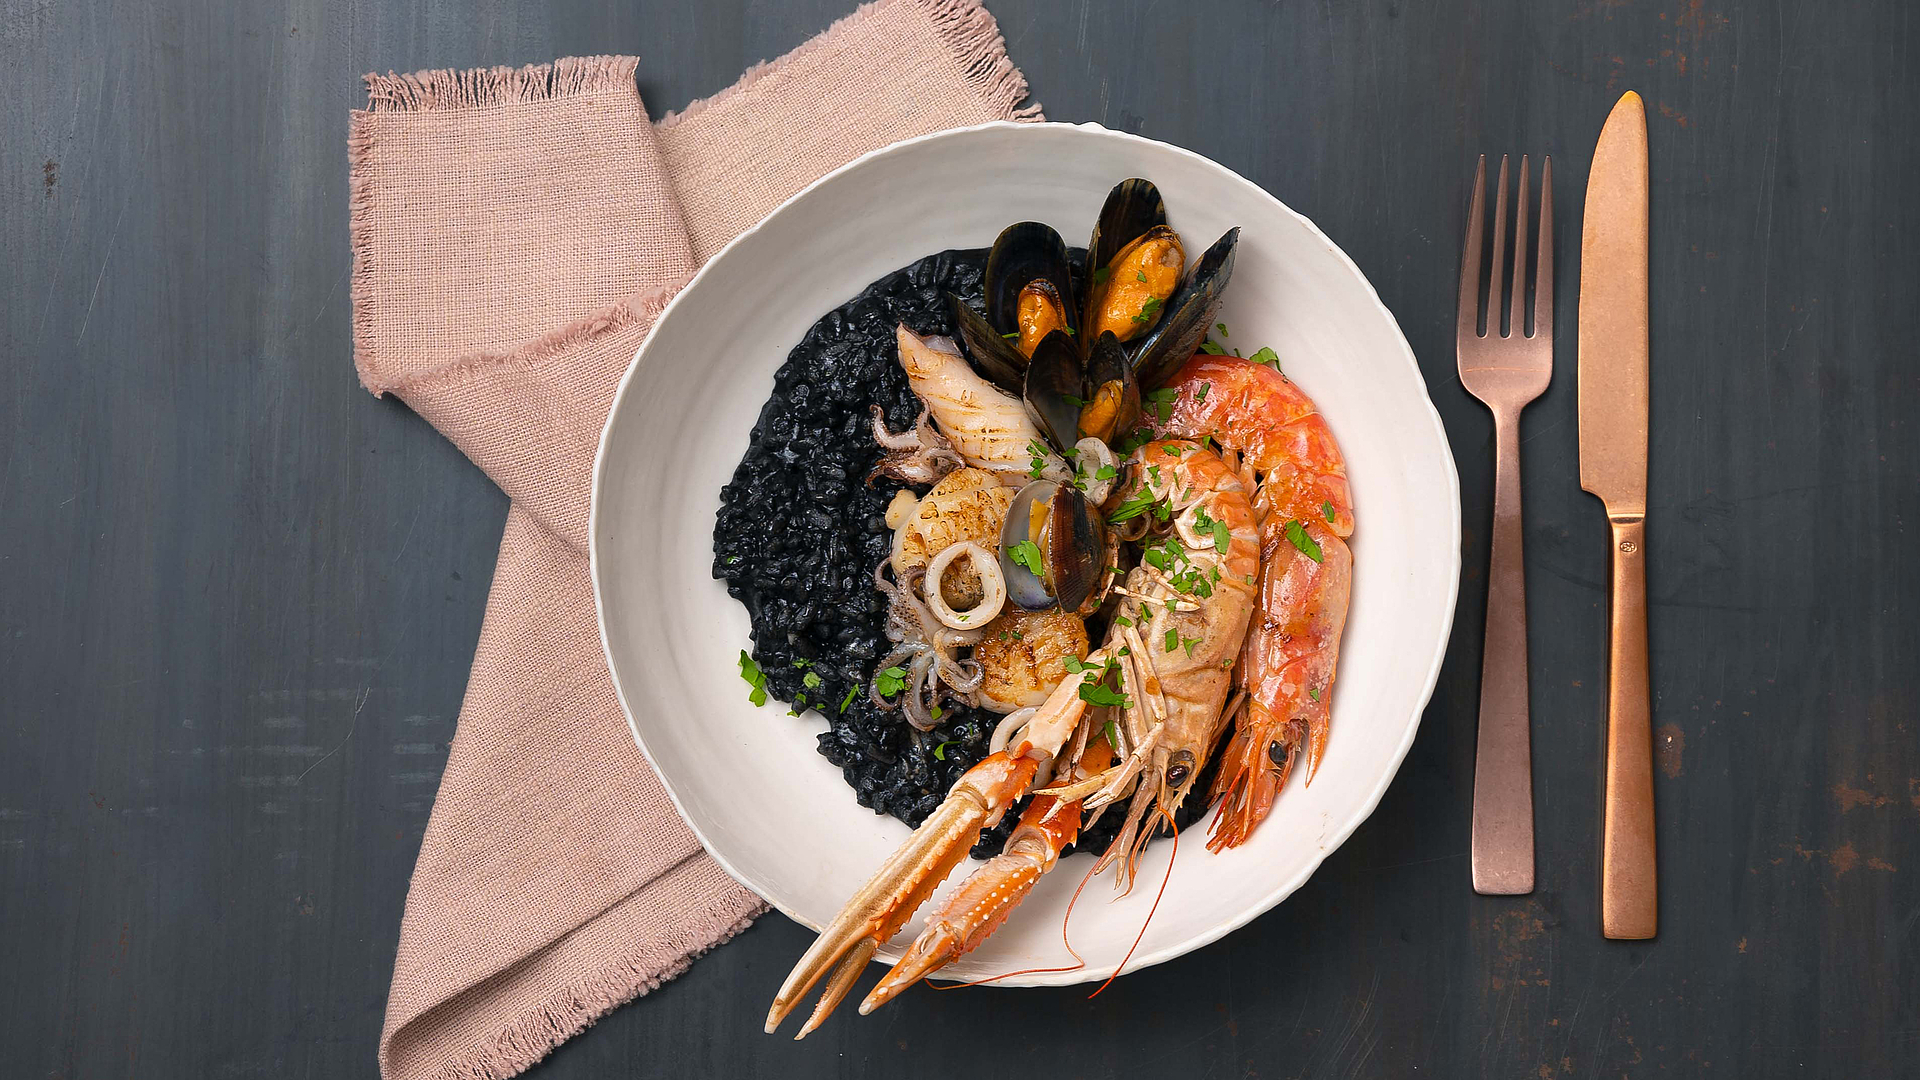 Black risotto with crustaceans